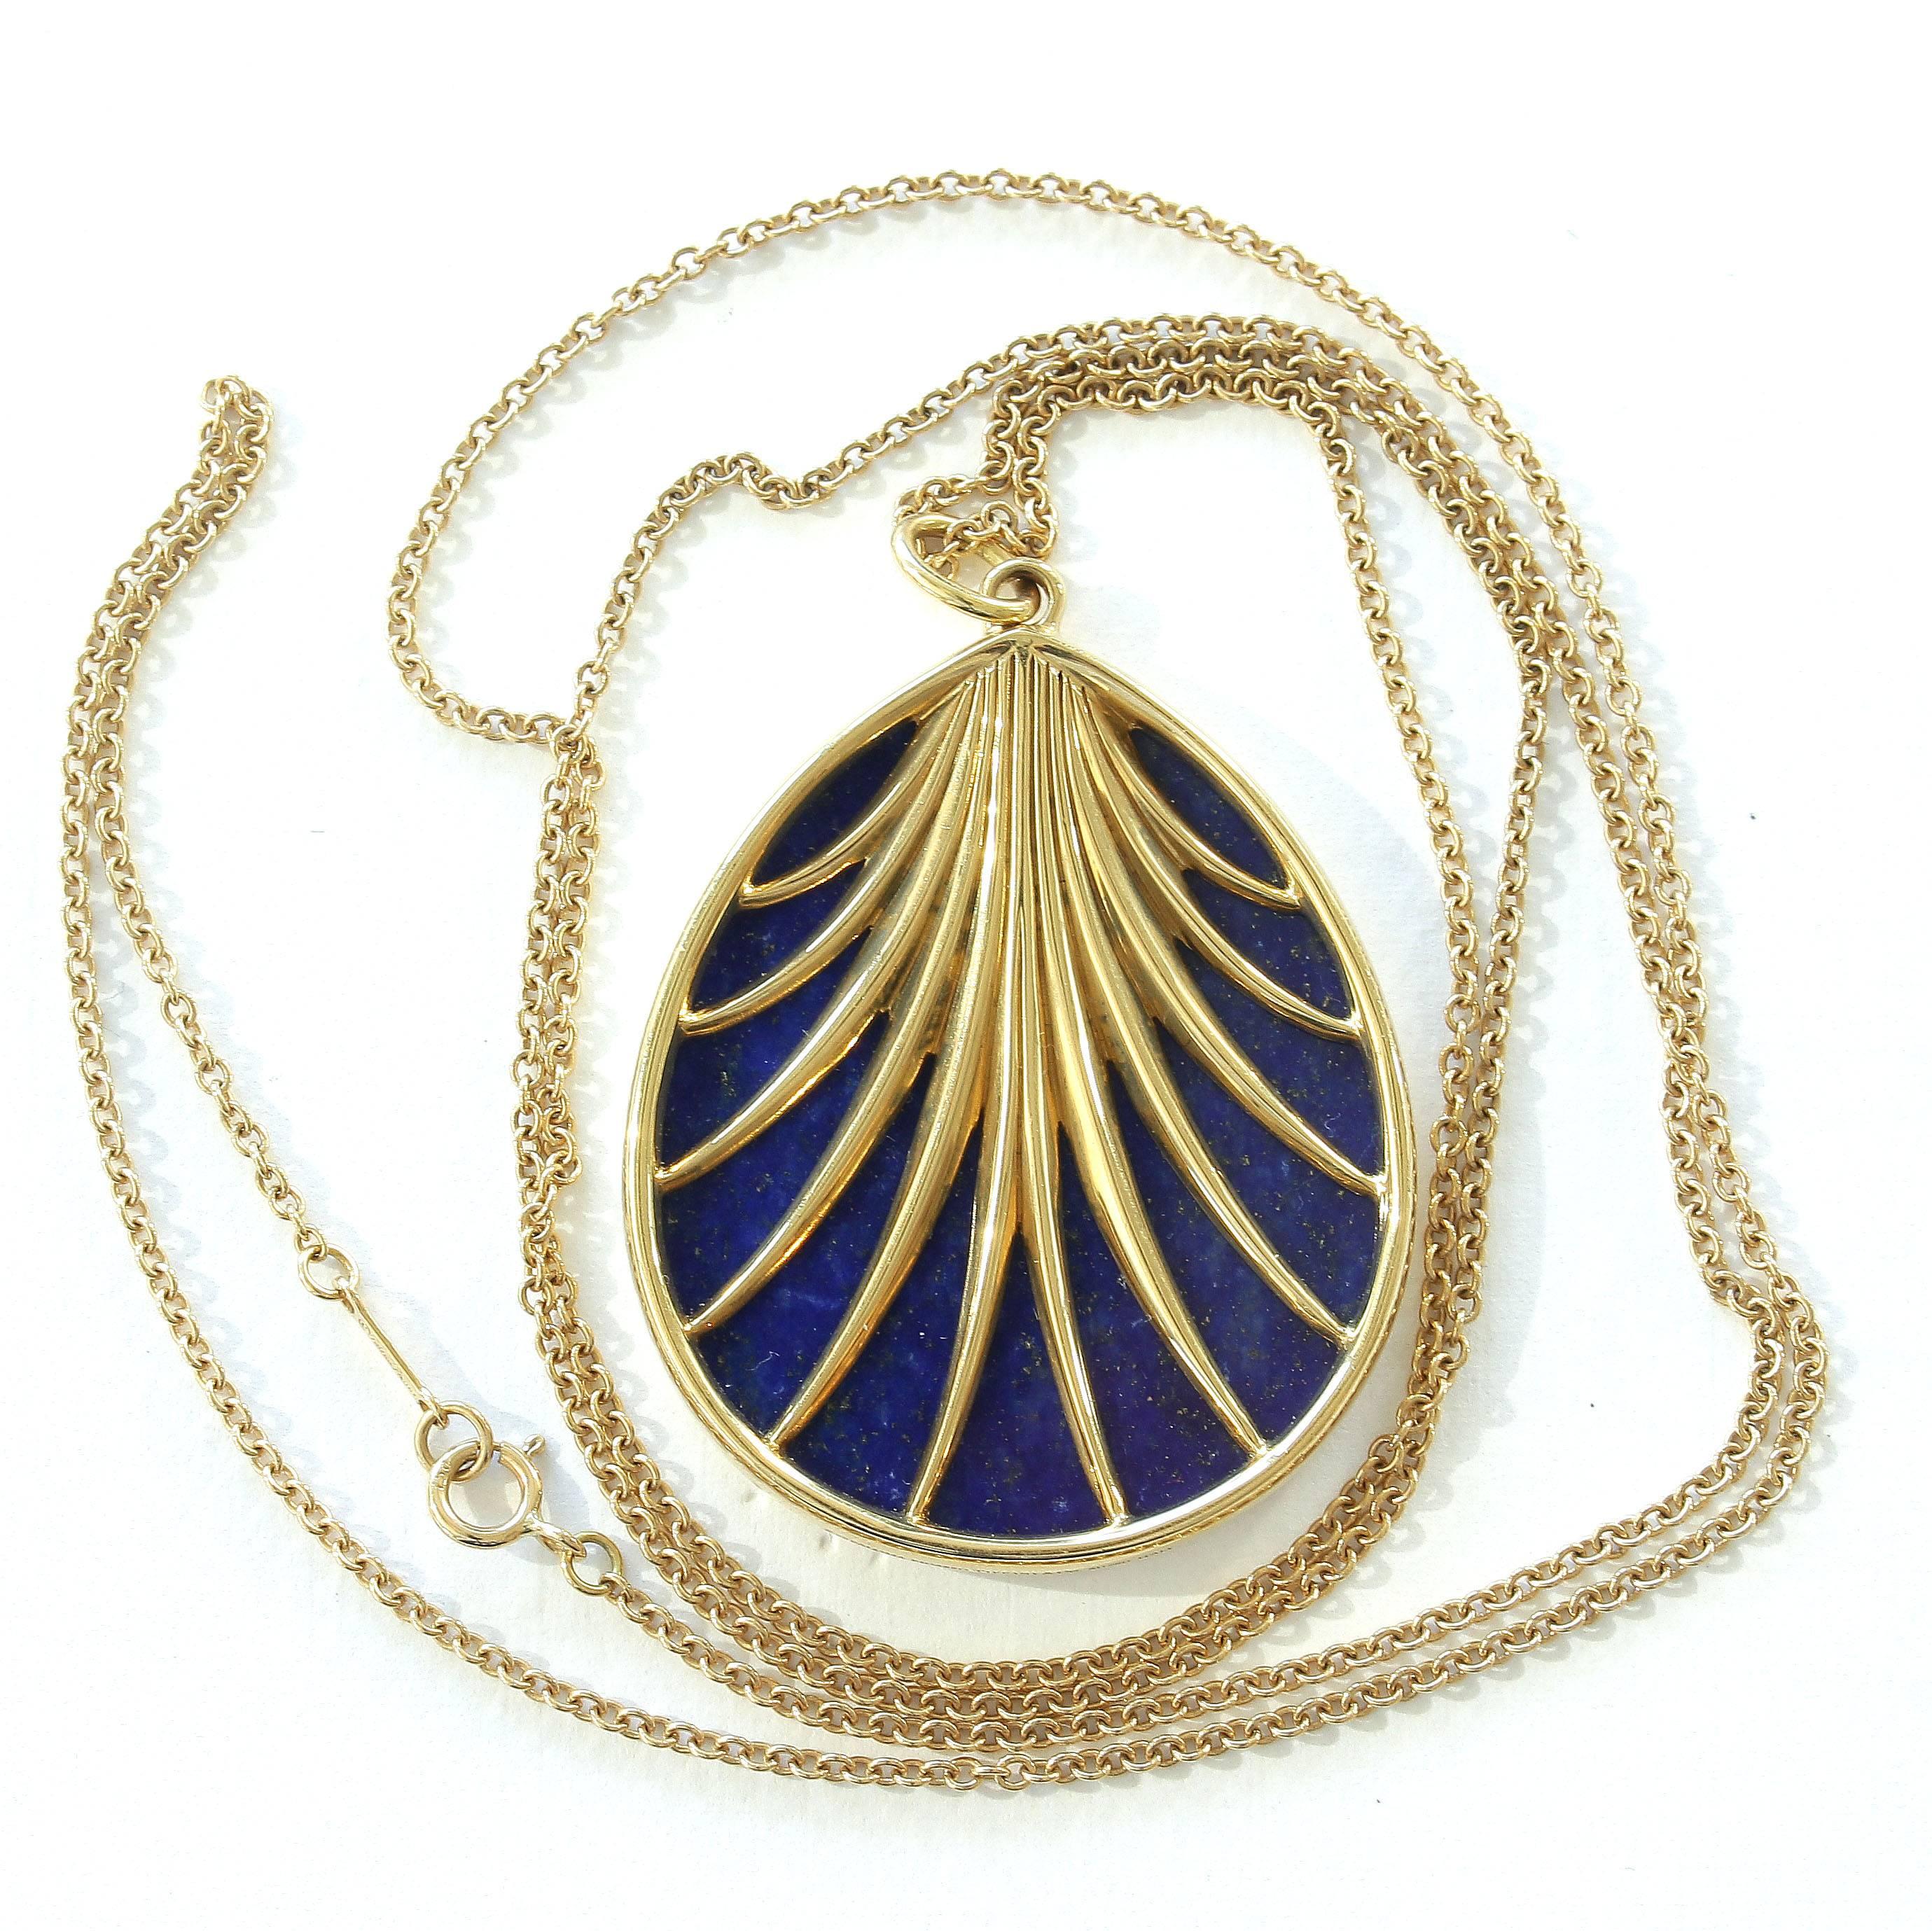 Creativity runs deep in the Picasso family. Featuring a palm tree of gold that has been painted on multihued blue lapis lazuli. Crafted in 18k gold. Signed Tiffany & Co. Paloma Picasso.